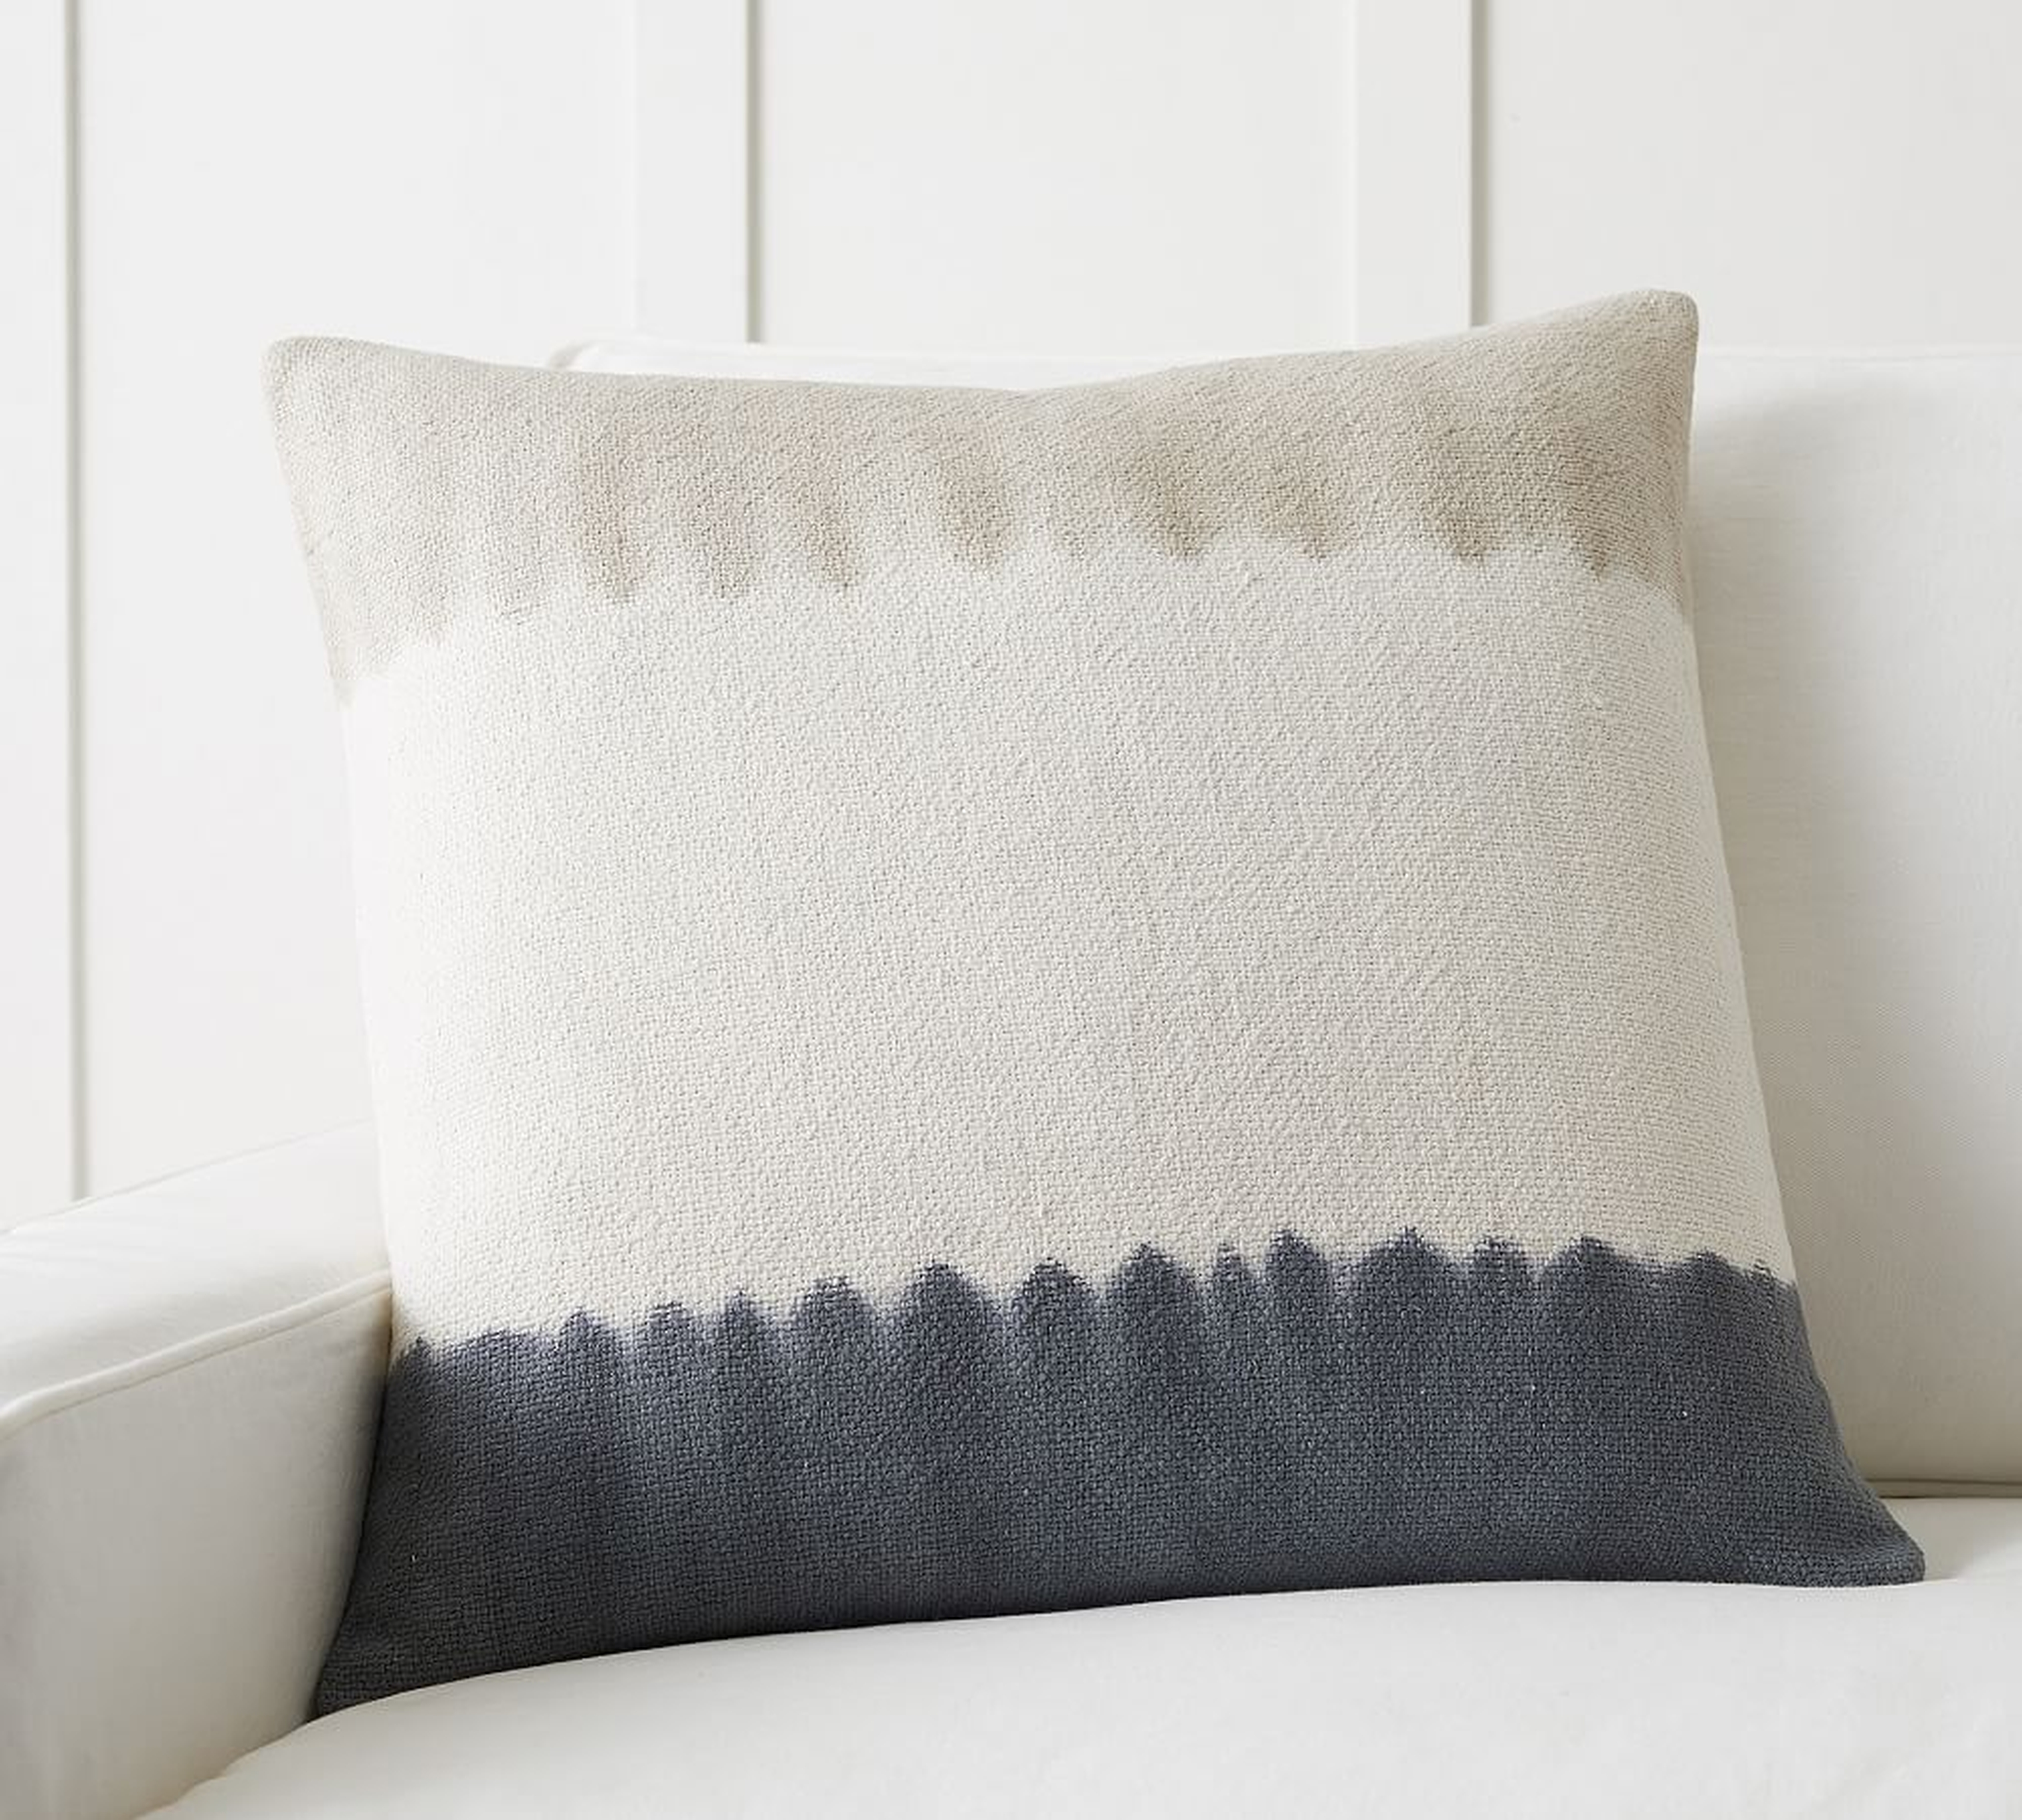 Dip Dyed Pillow Cover, 22 x 22", Blue/Natural - Pottery Barn